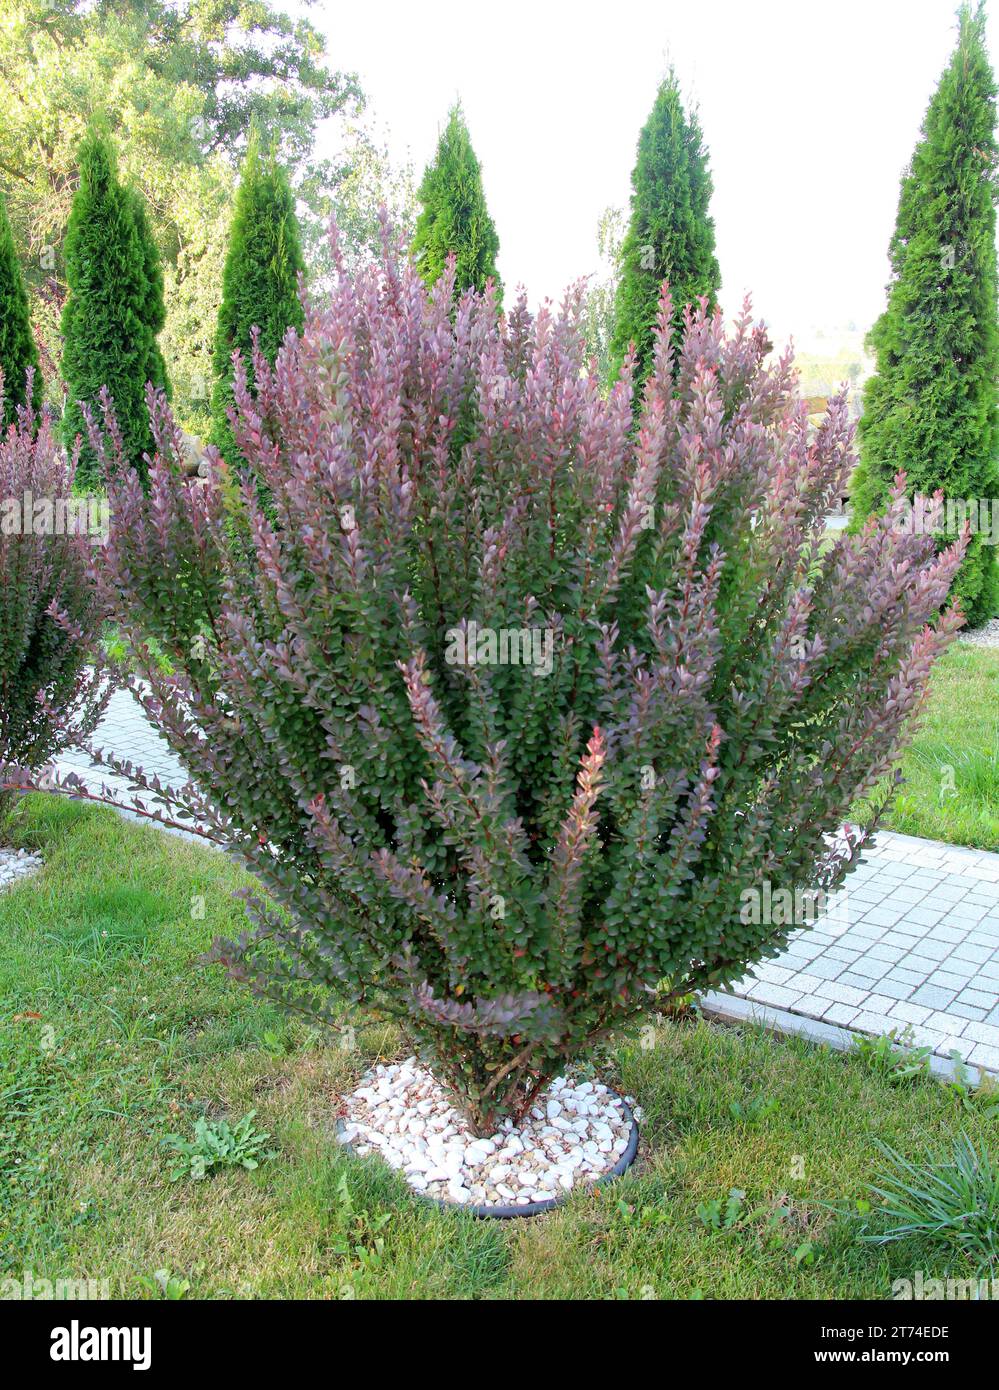 Thunberg's barberry (Berberis thunbergii) grows in the garden in spring Stock Photo